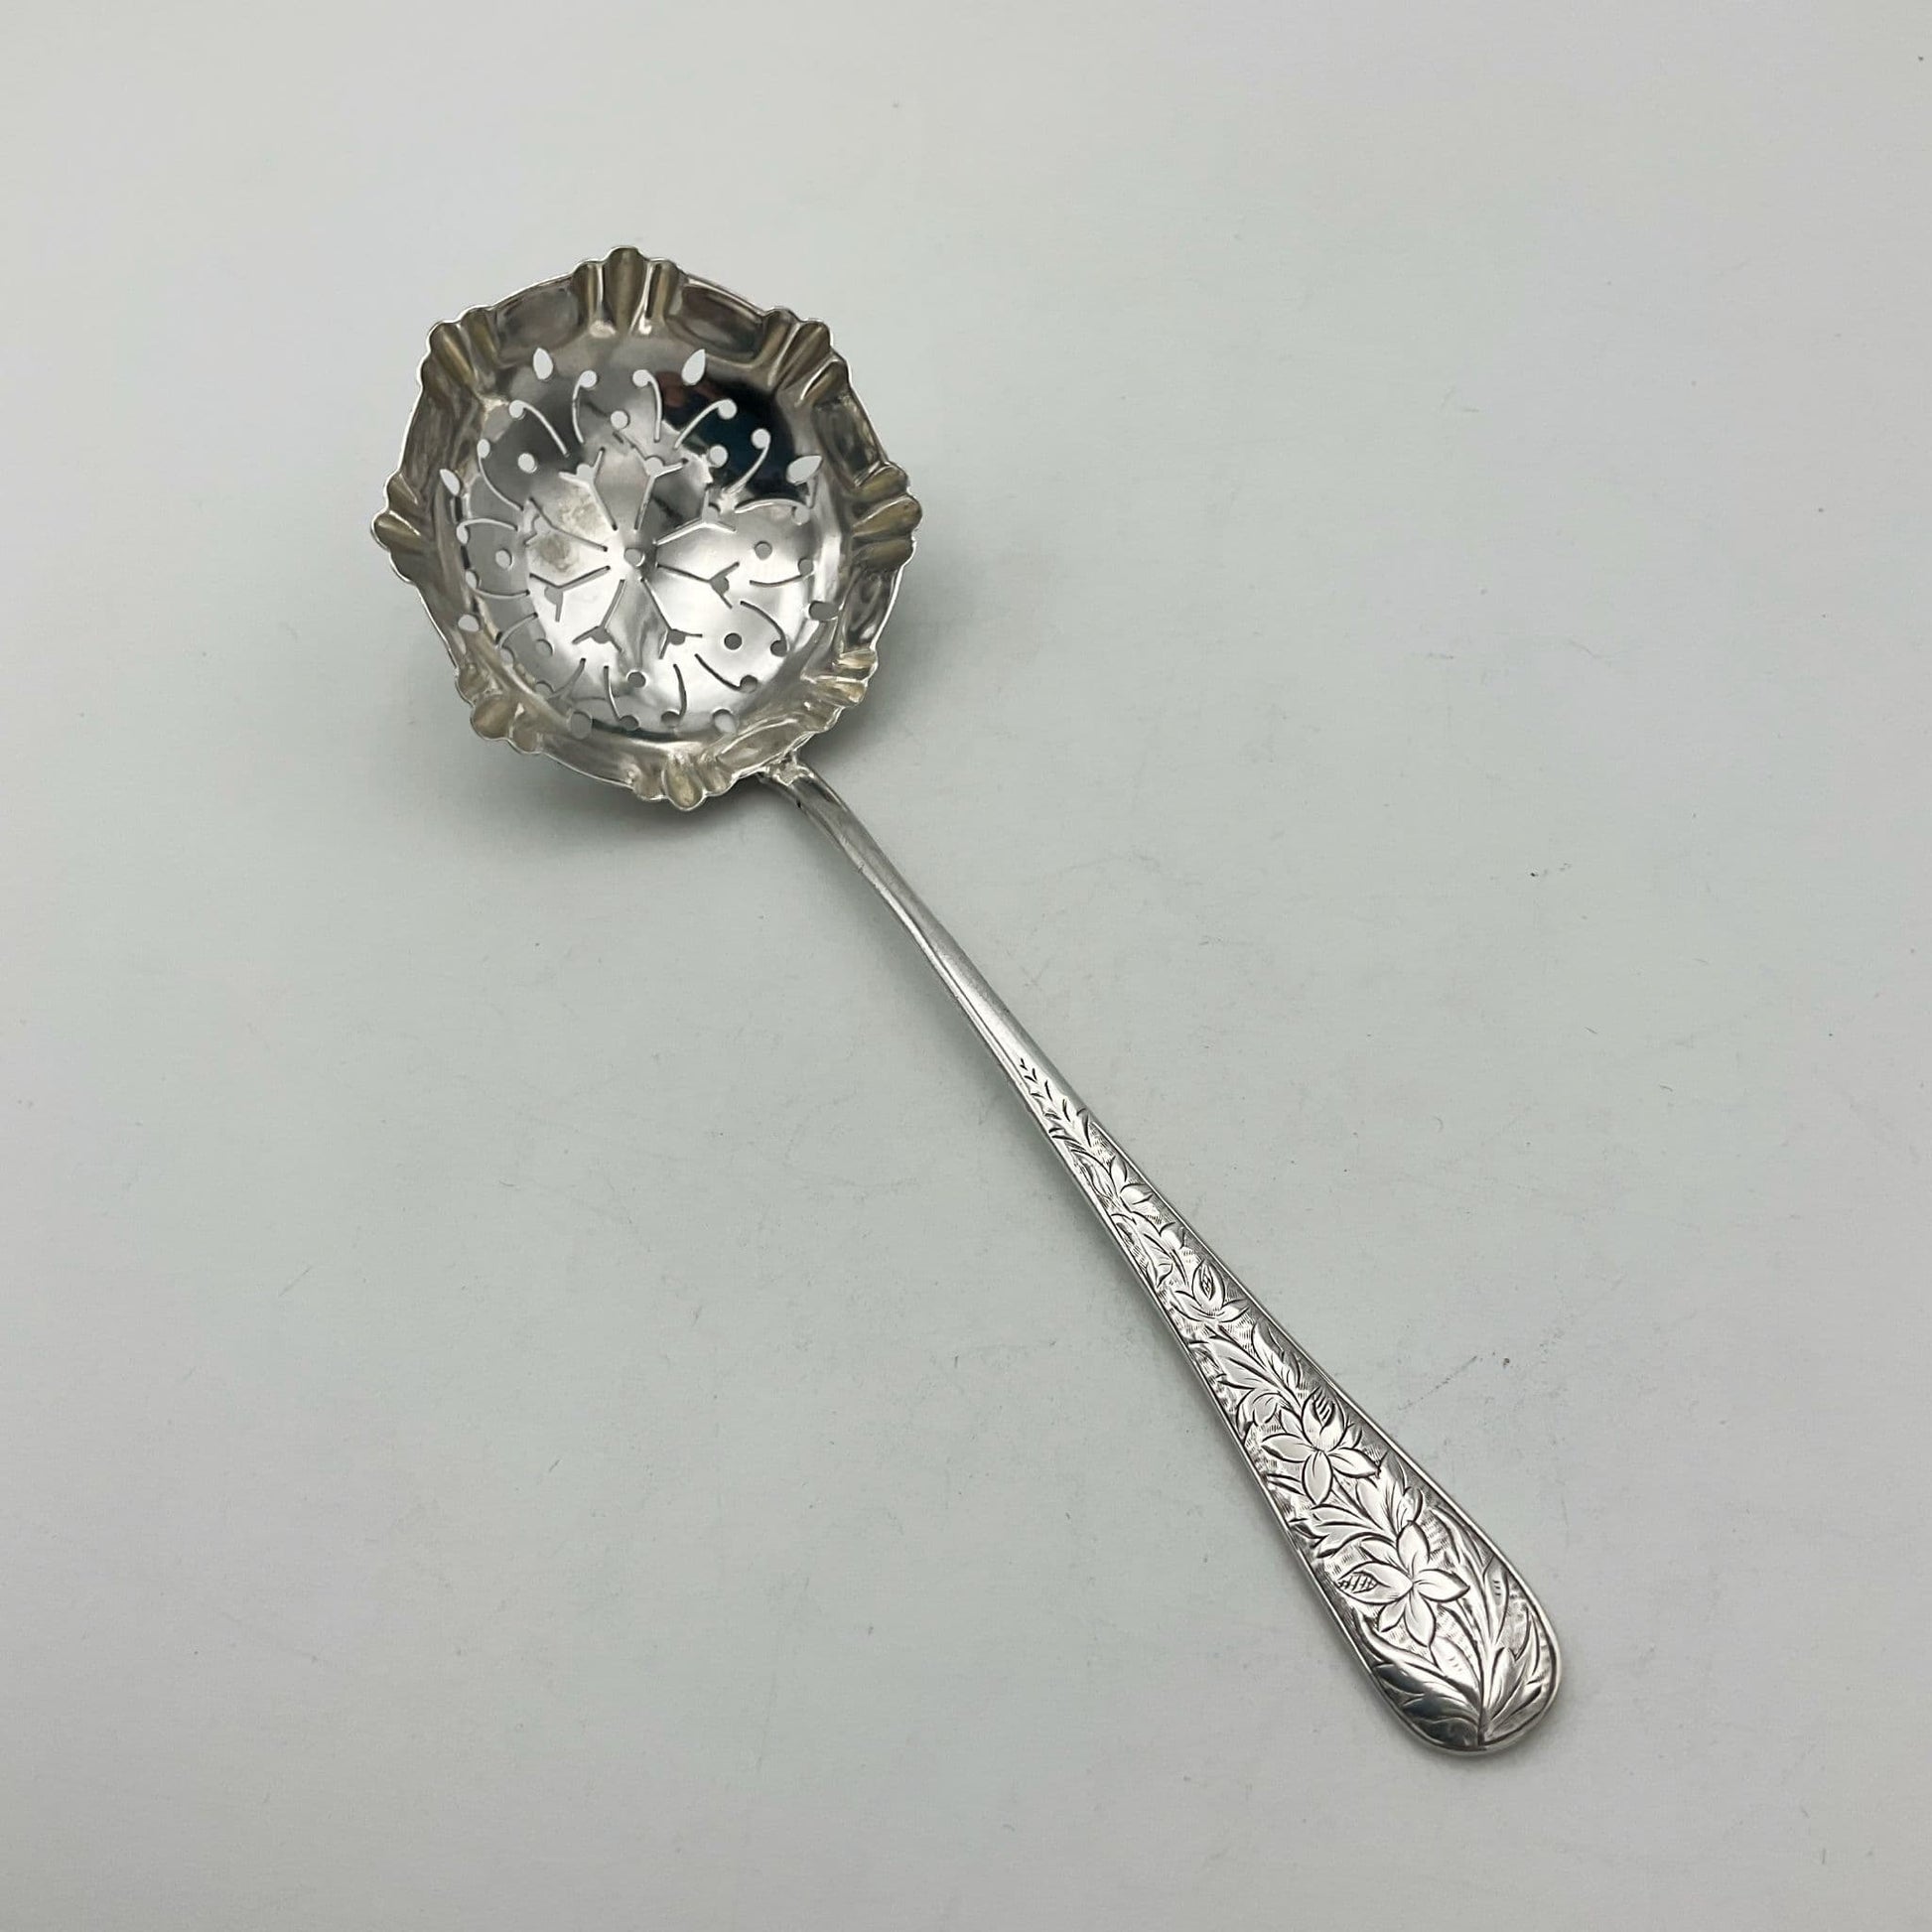 Antique Silver Sifter Spoon with flowers on the handle on white background 